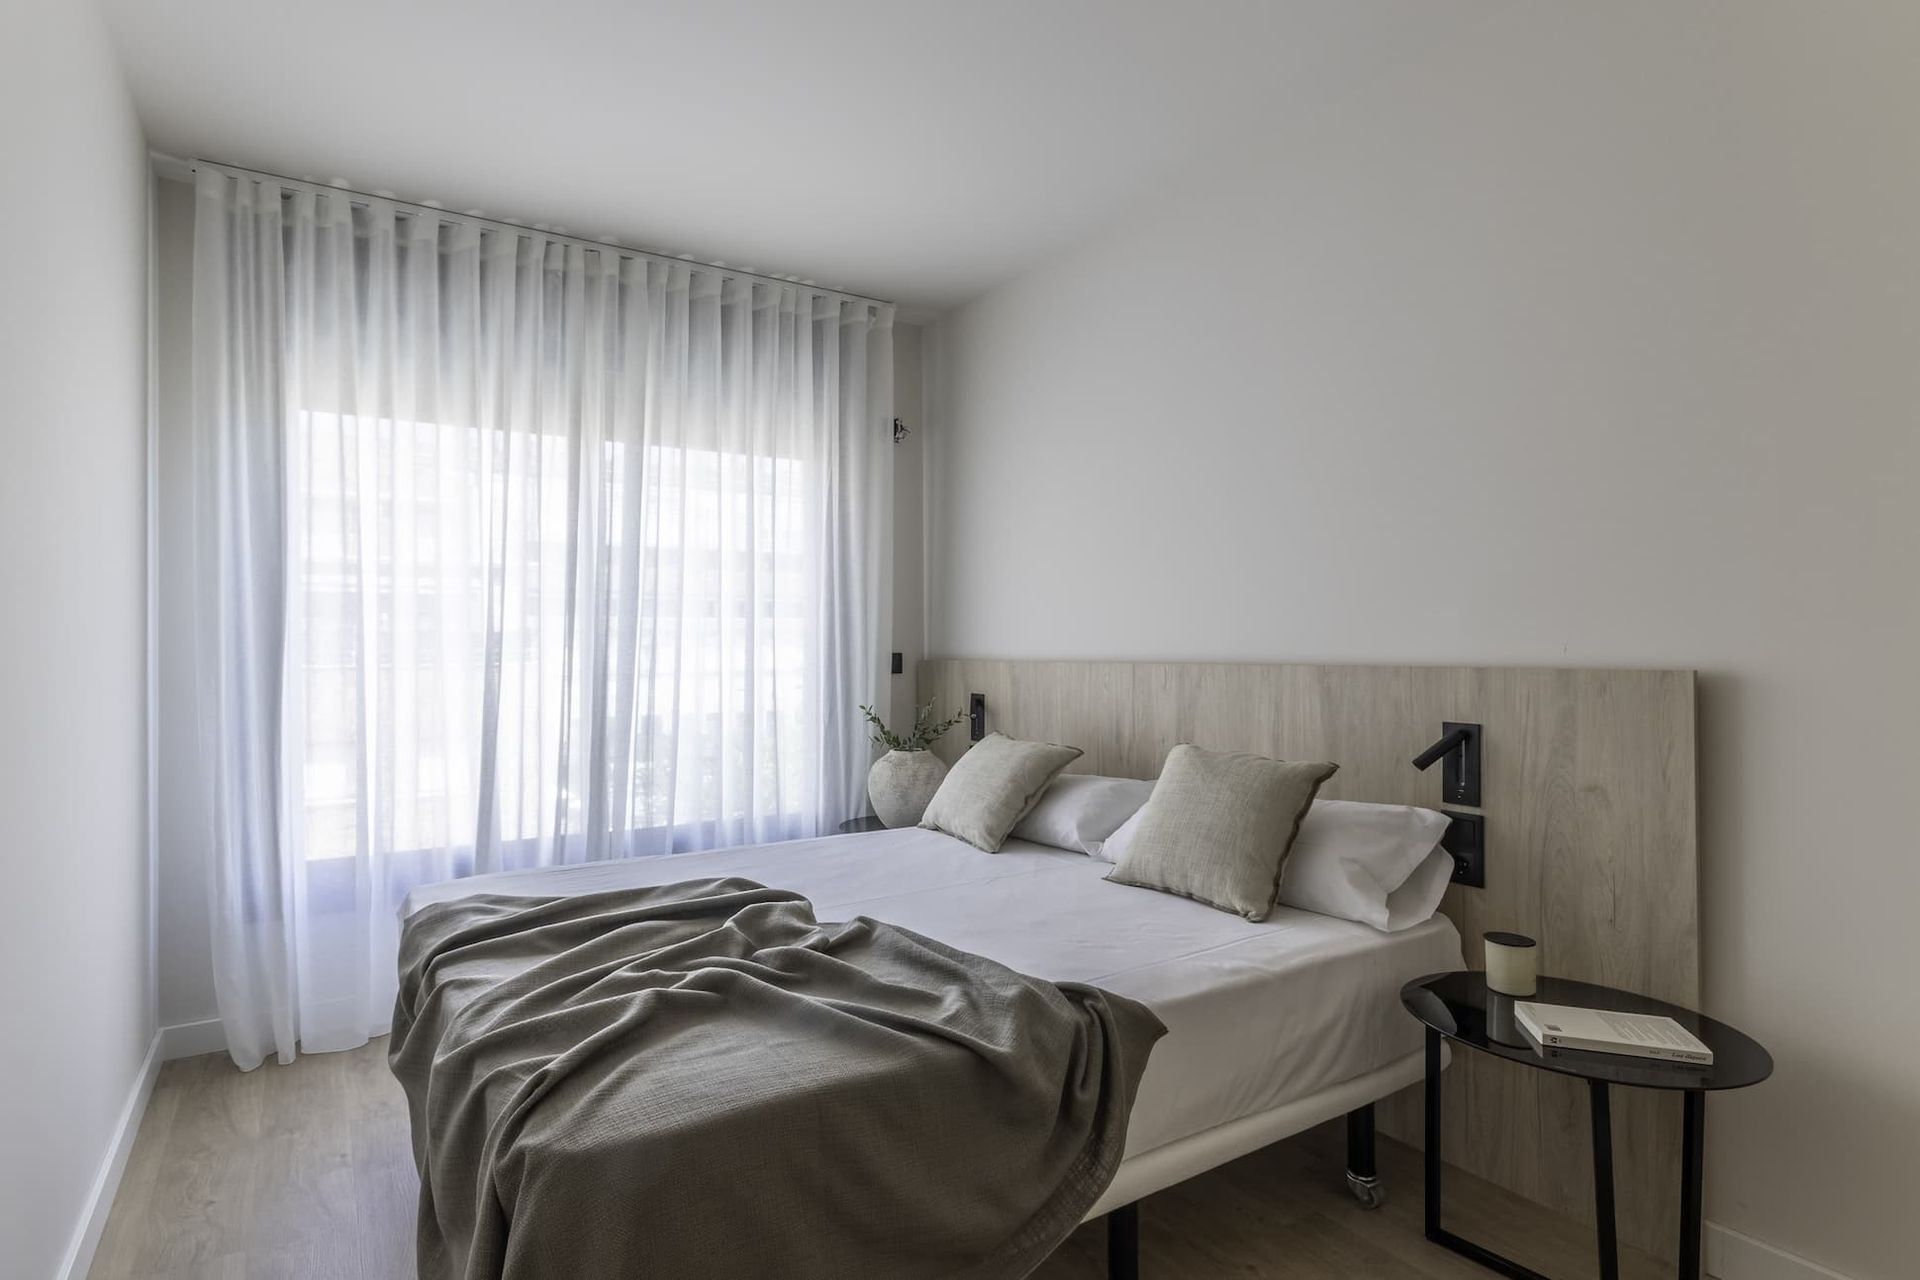 2 bedroom apartment in Pamplona Yamaguchi